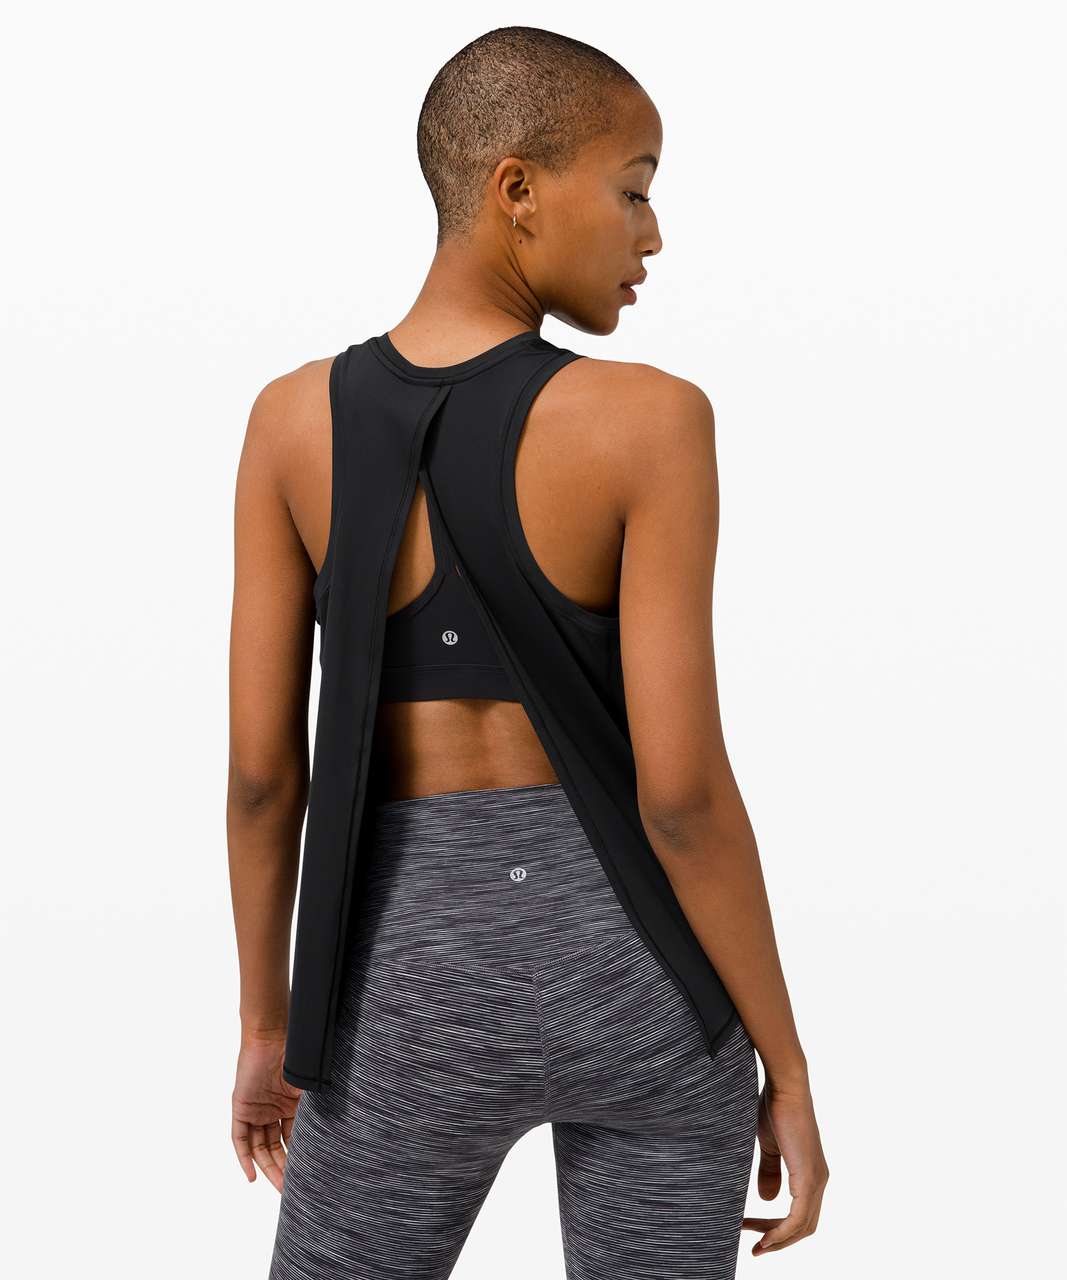 Lululemon All Tied Up Tank Top - Black (First Release)